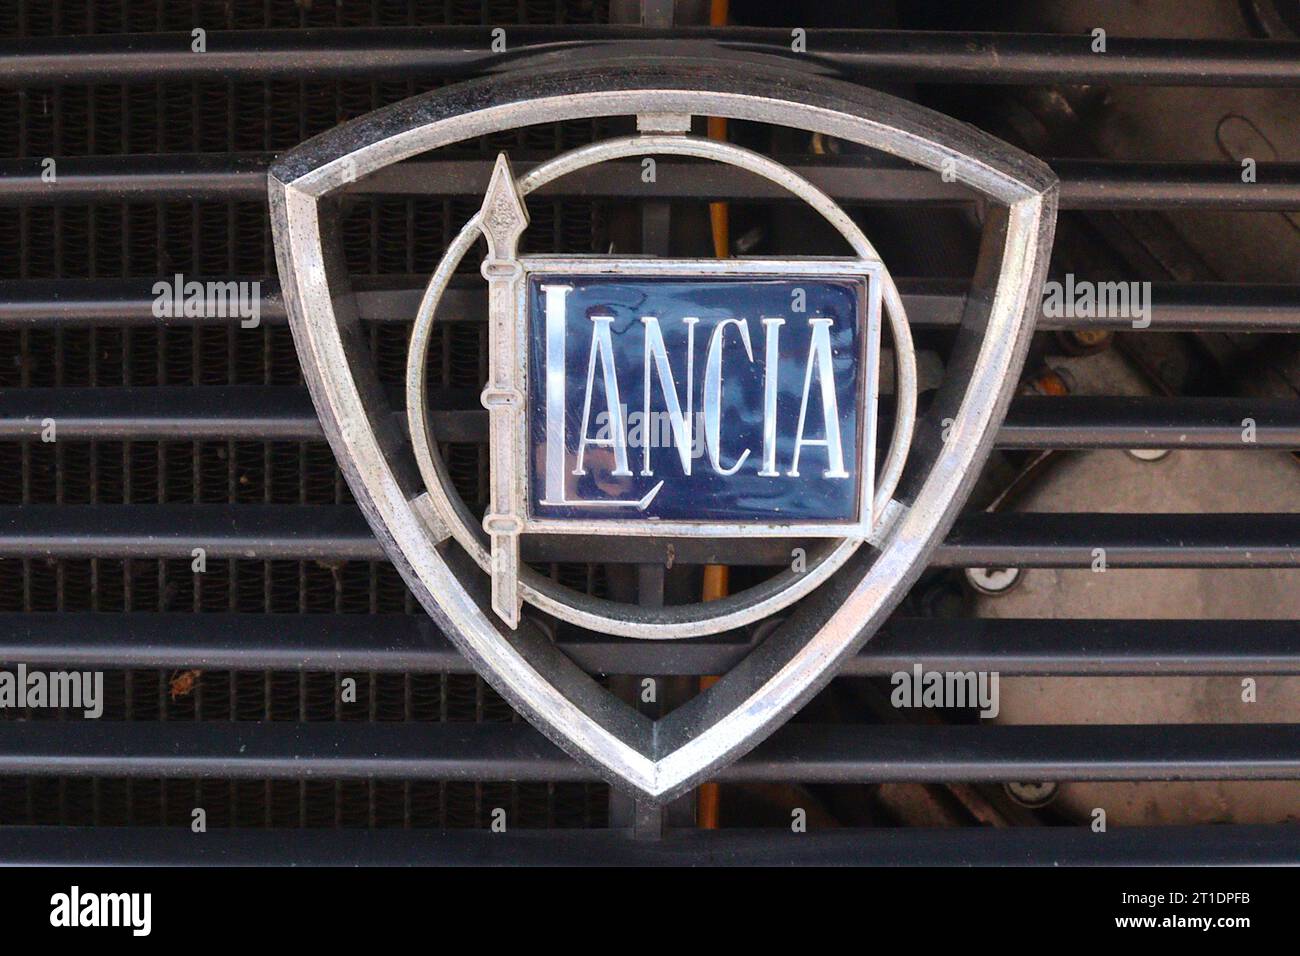 Lancia radiator grille shield badge affixed to a 1973 Fulvia coupe 3 fitted with a 1298cc V4 engine and 1.3S badges, displayed at an Italian car show. Stock Photo